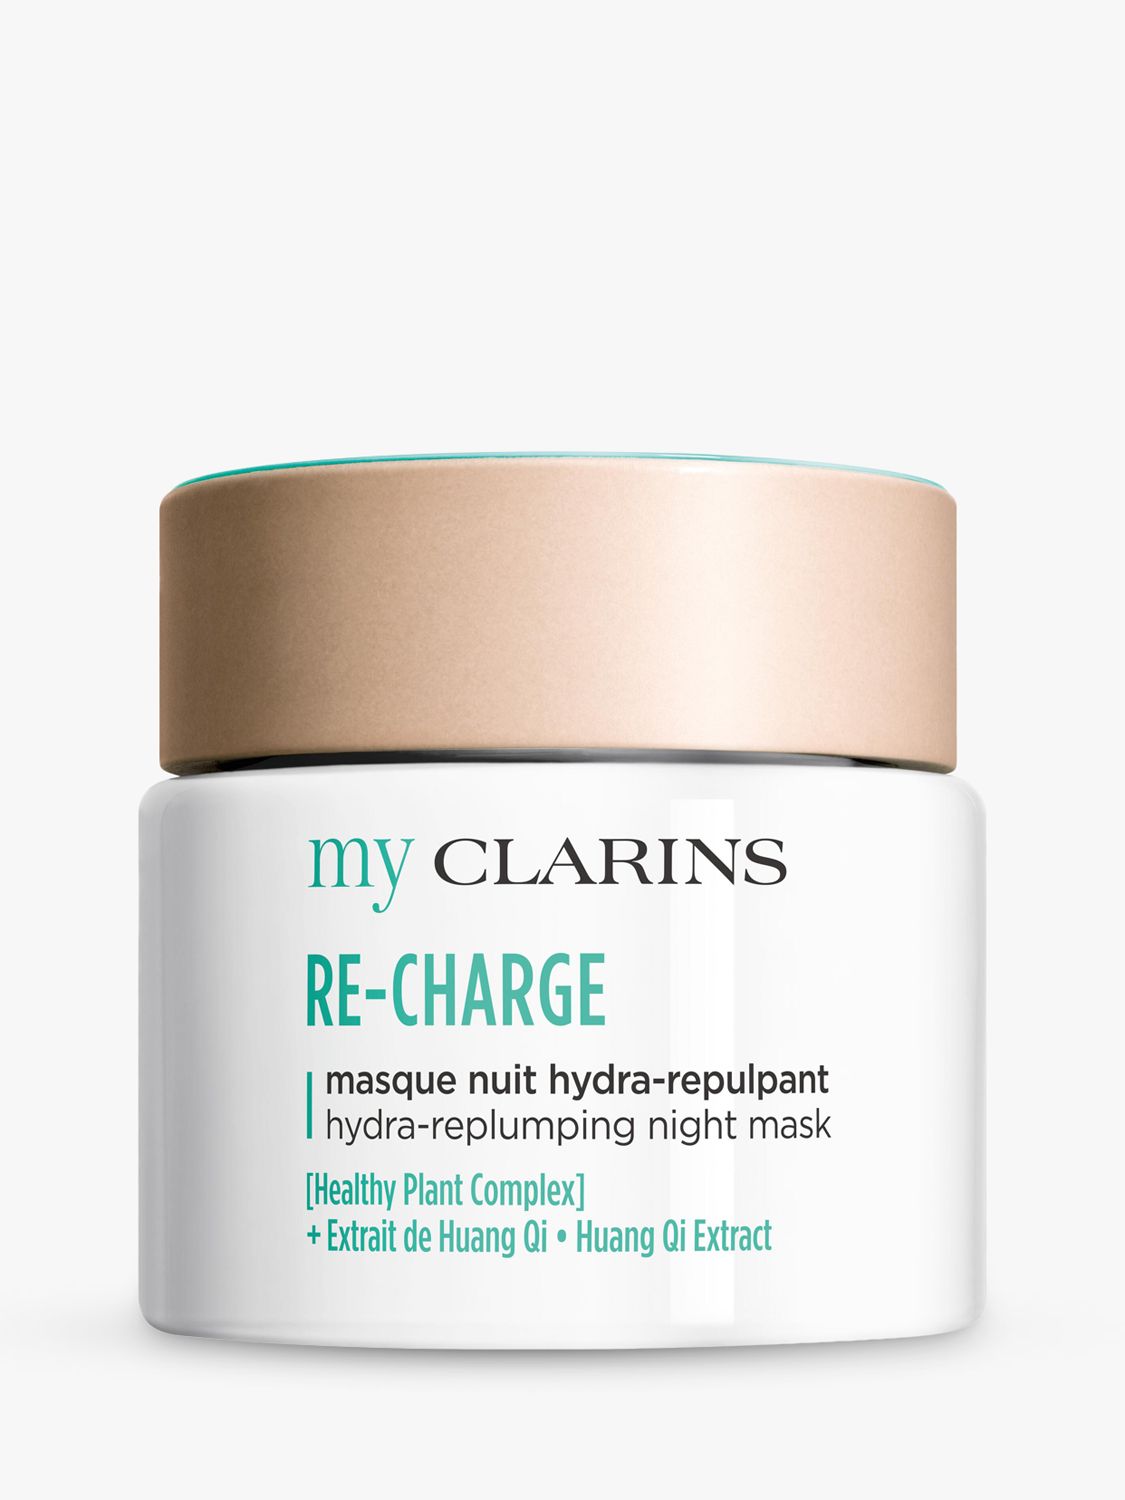 Clarins My Clarins RE-CHARGE Hydra-Replumping Night Mask, 50ml 1